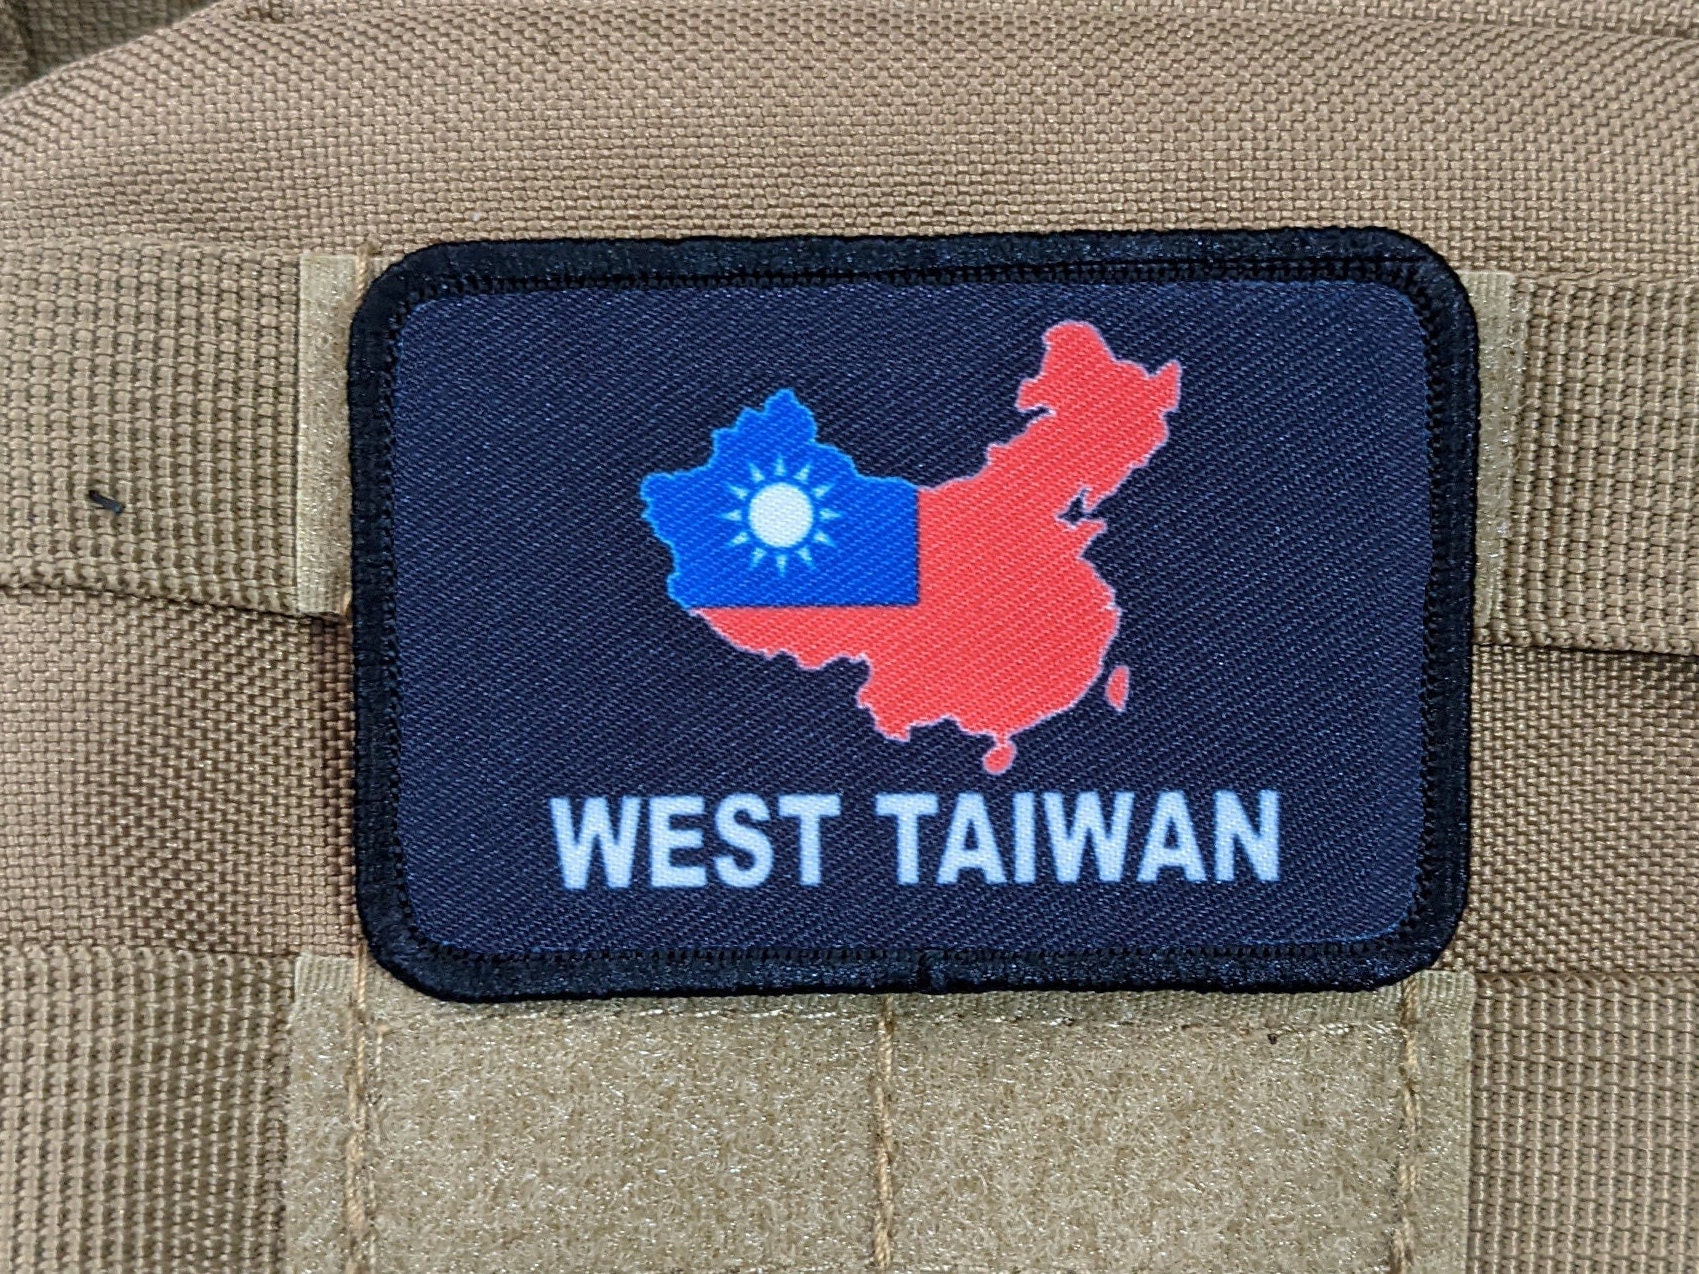 Taiwan Flag Morale Patch, Scramble Taiwan Air Force PVC Patch - Funny Tactical Patches, Molle Accessories | Military Patches for Clothes, Hat